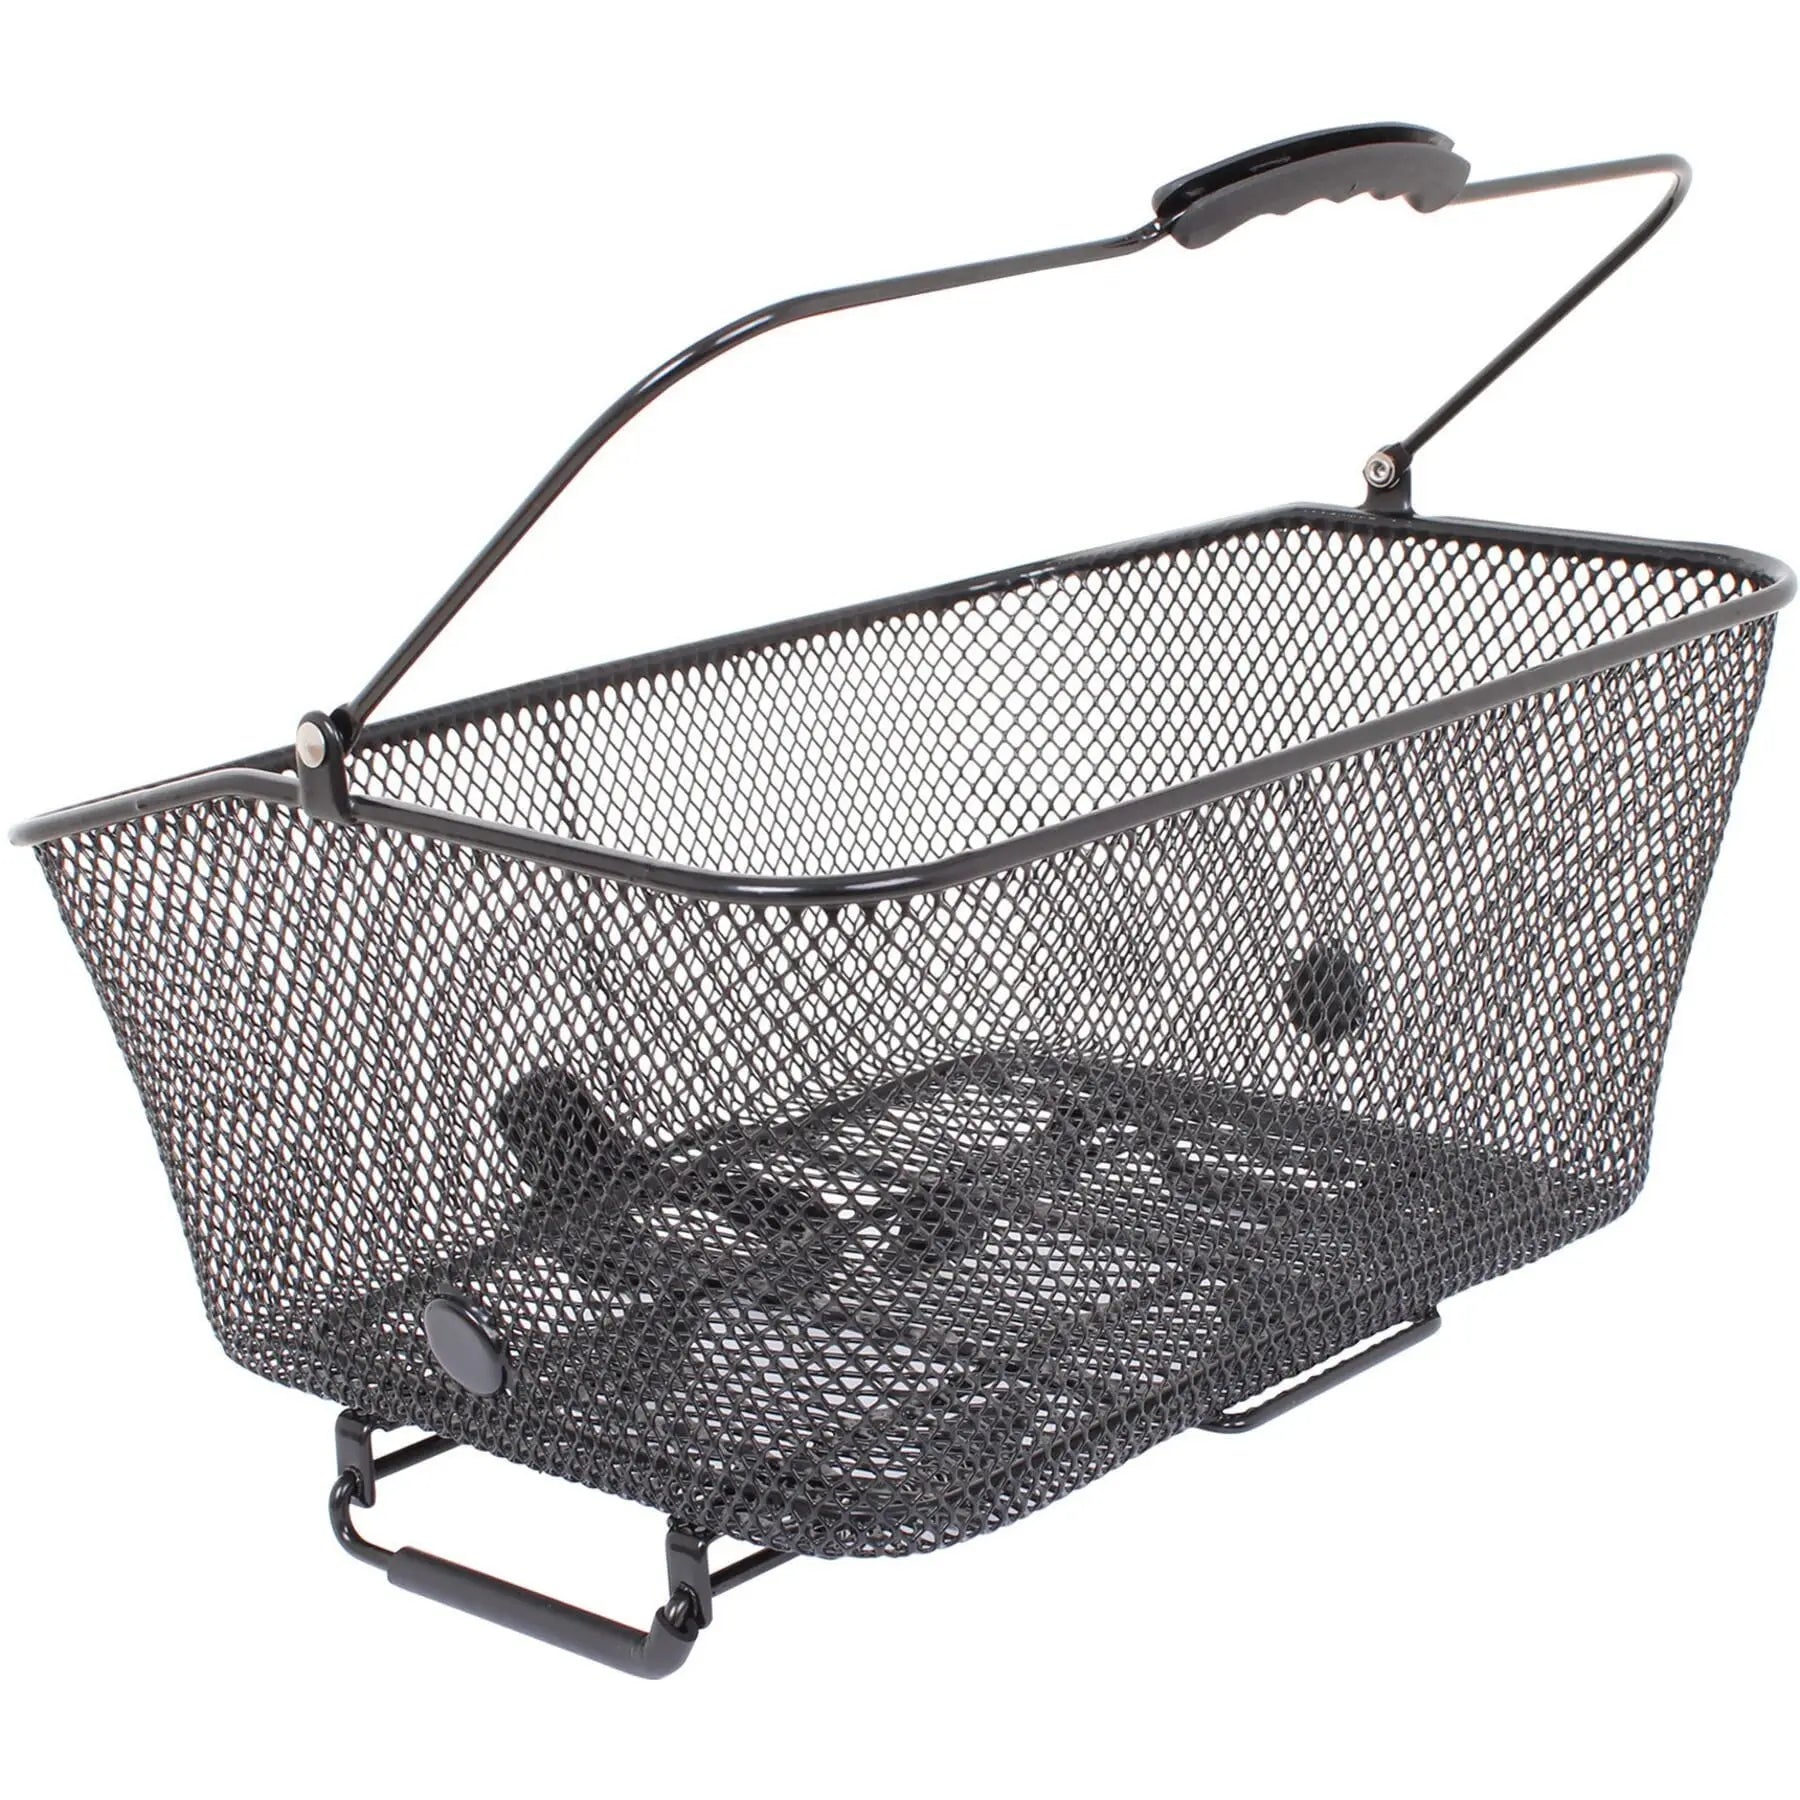 M-Part Brocante mesh rear basket with spring clips and handles M-part